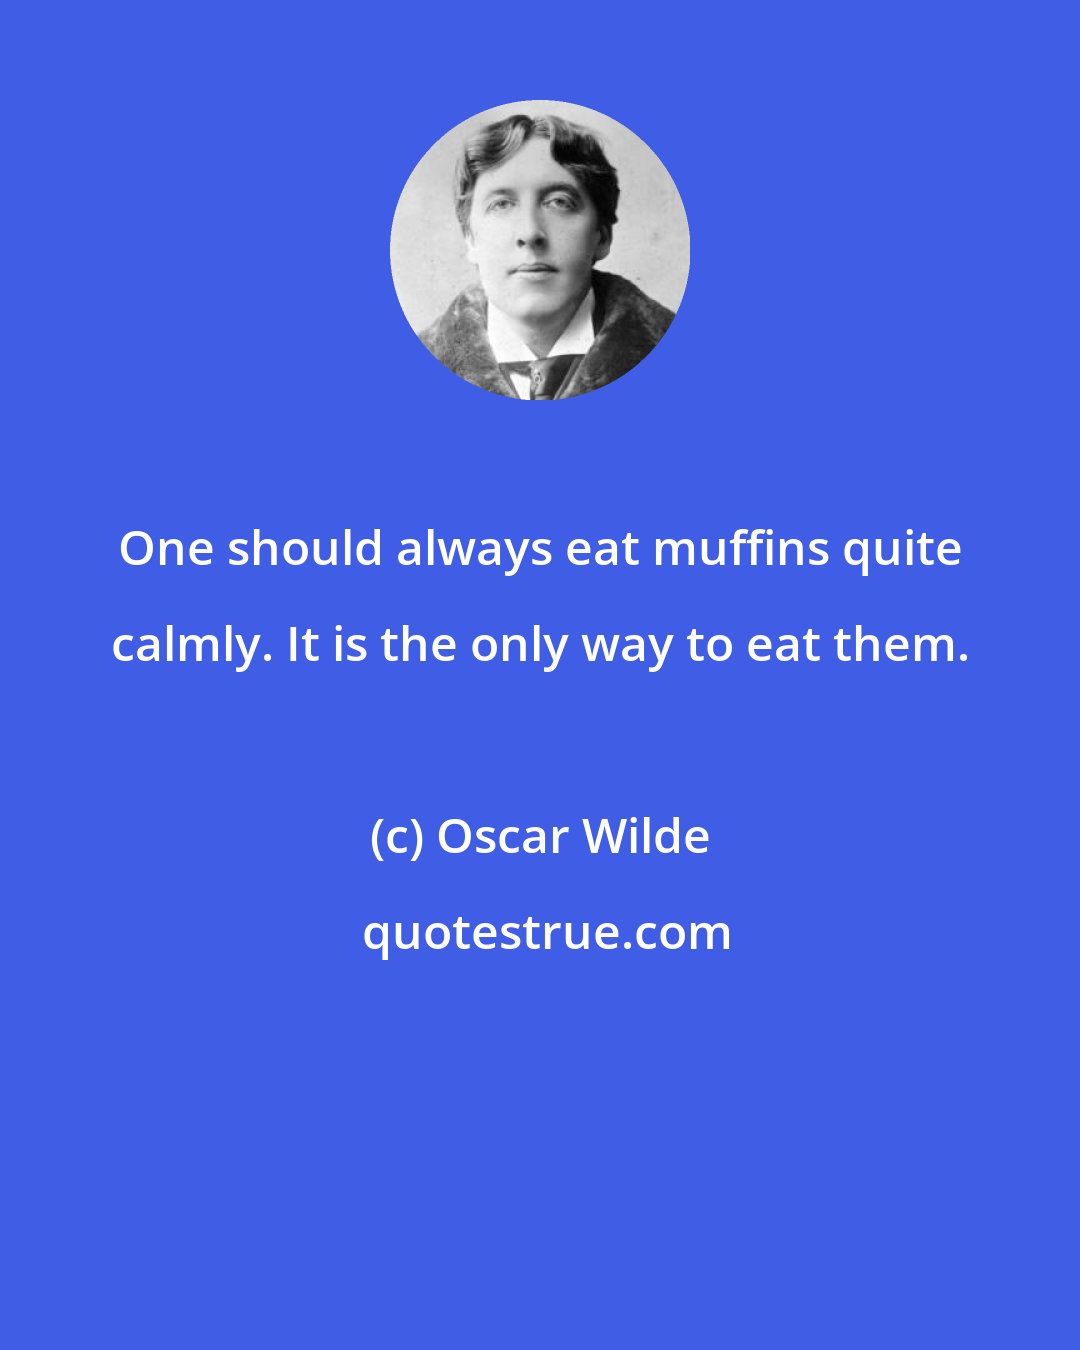 Oscar Wilde: One should always eat muffins quite calmly. It is the only way to eat them.